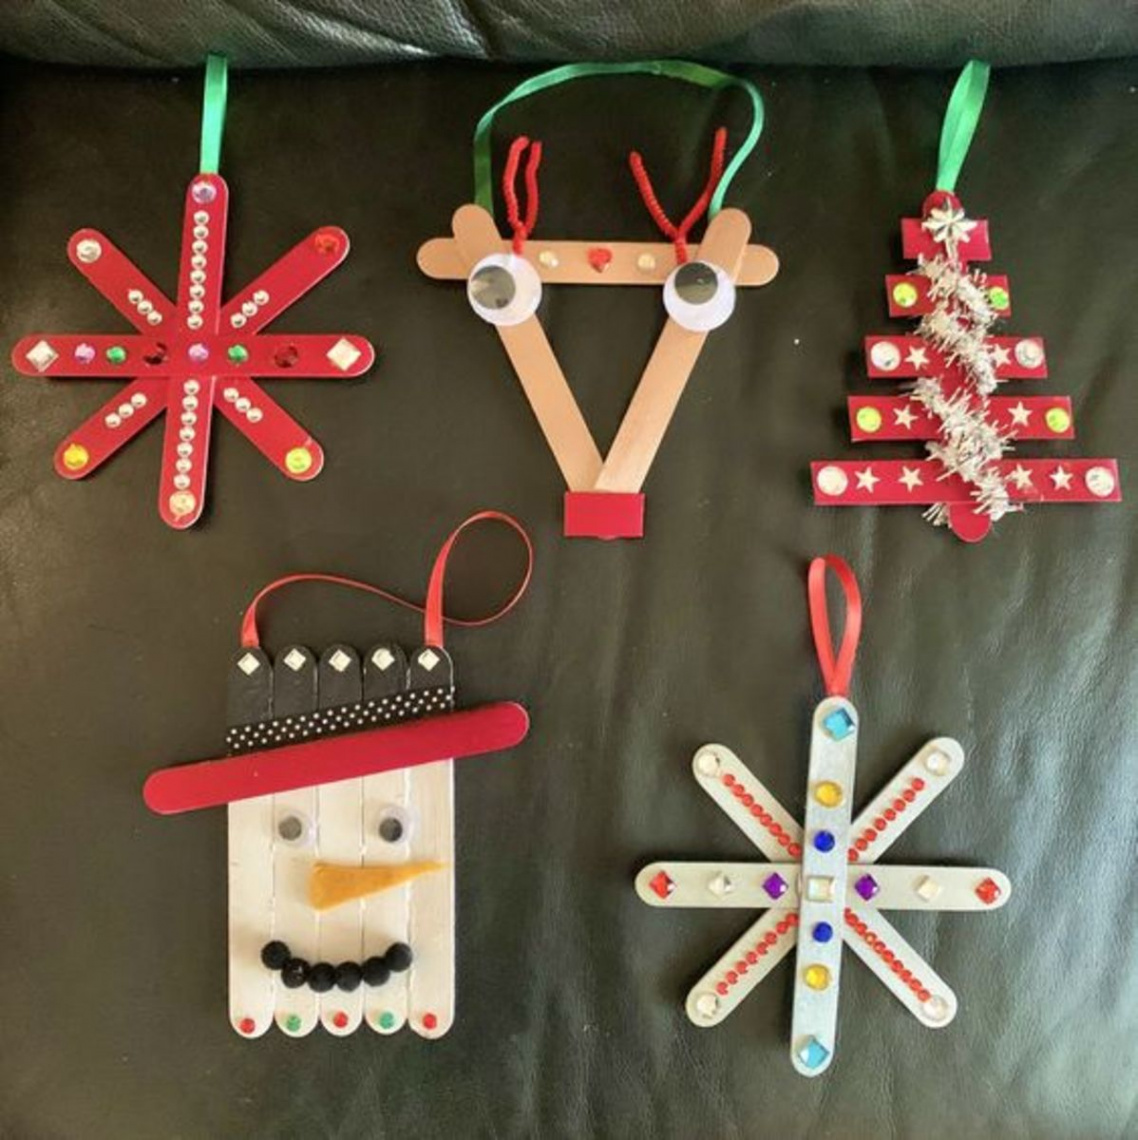 + Easy Christmas Crafts Your Kids Will Love to Make - FeltMagnet